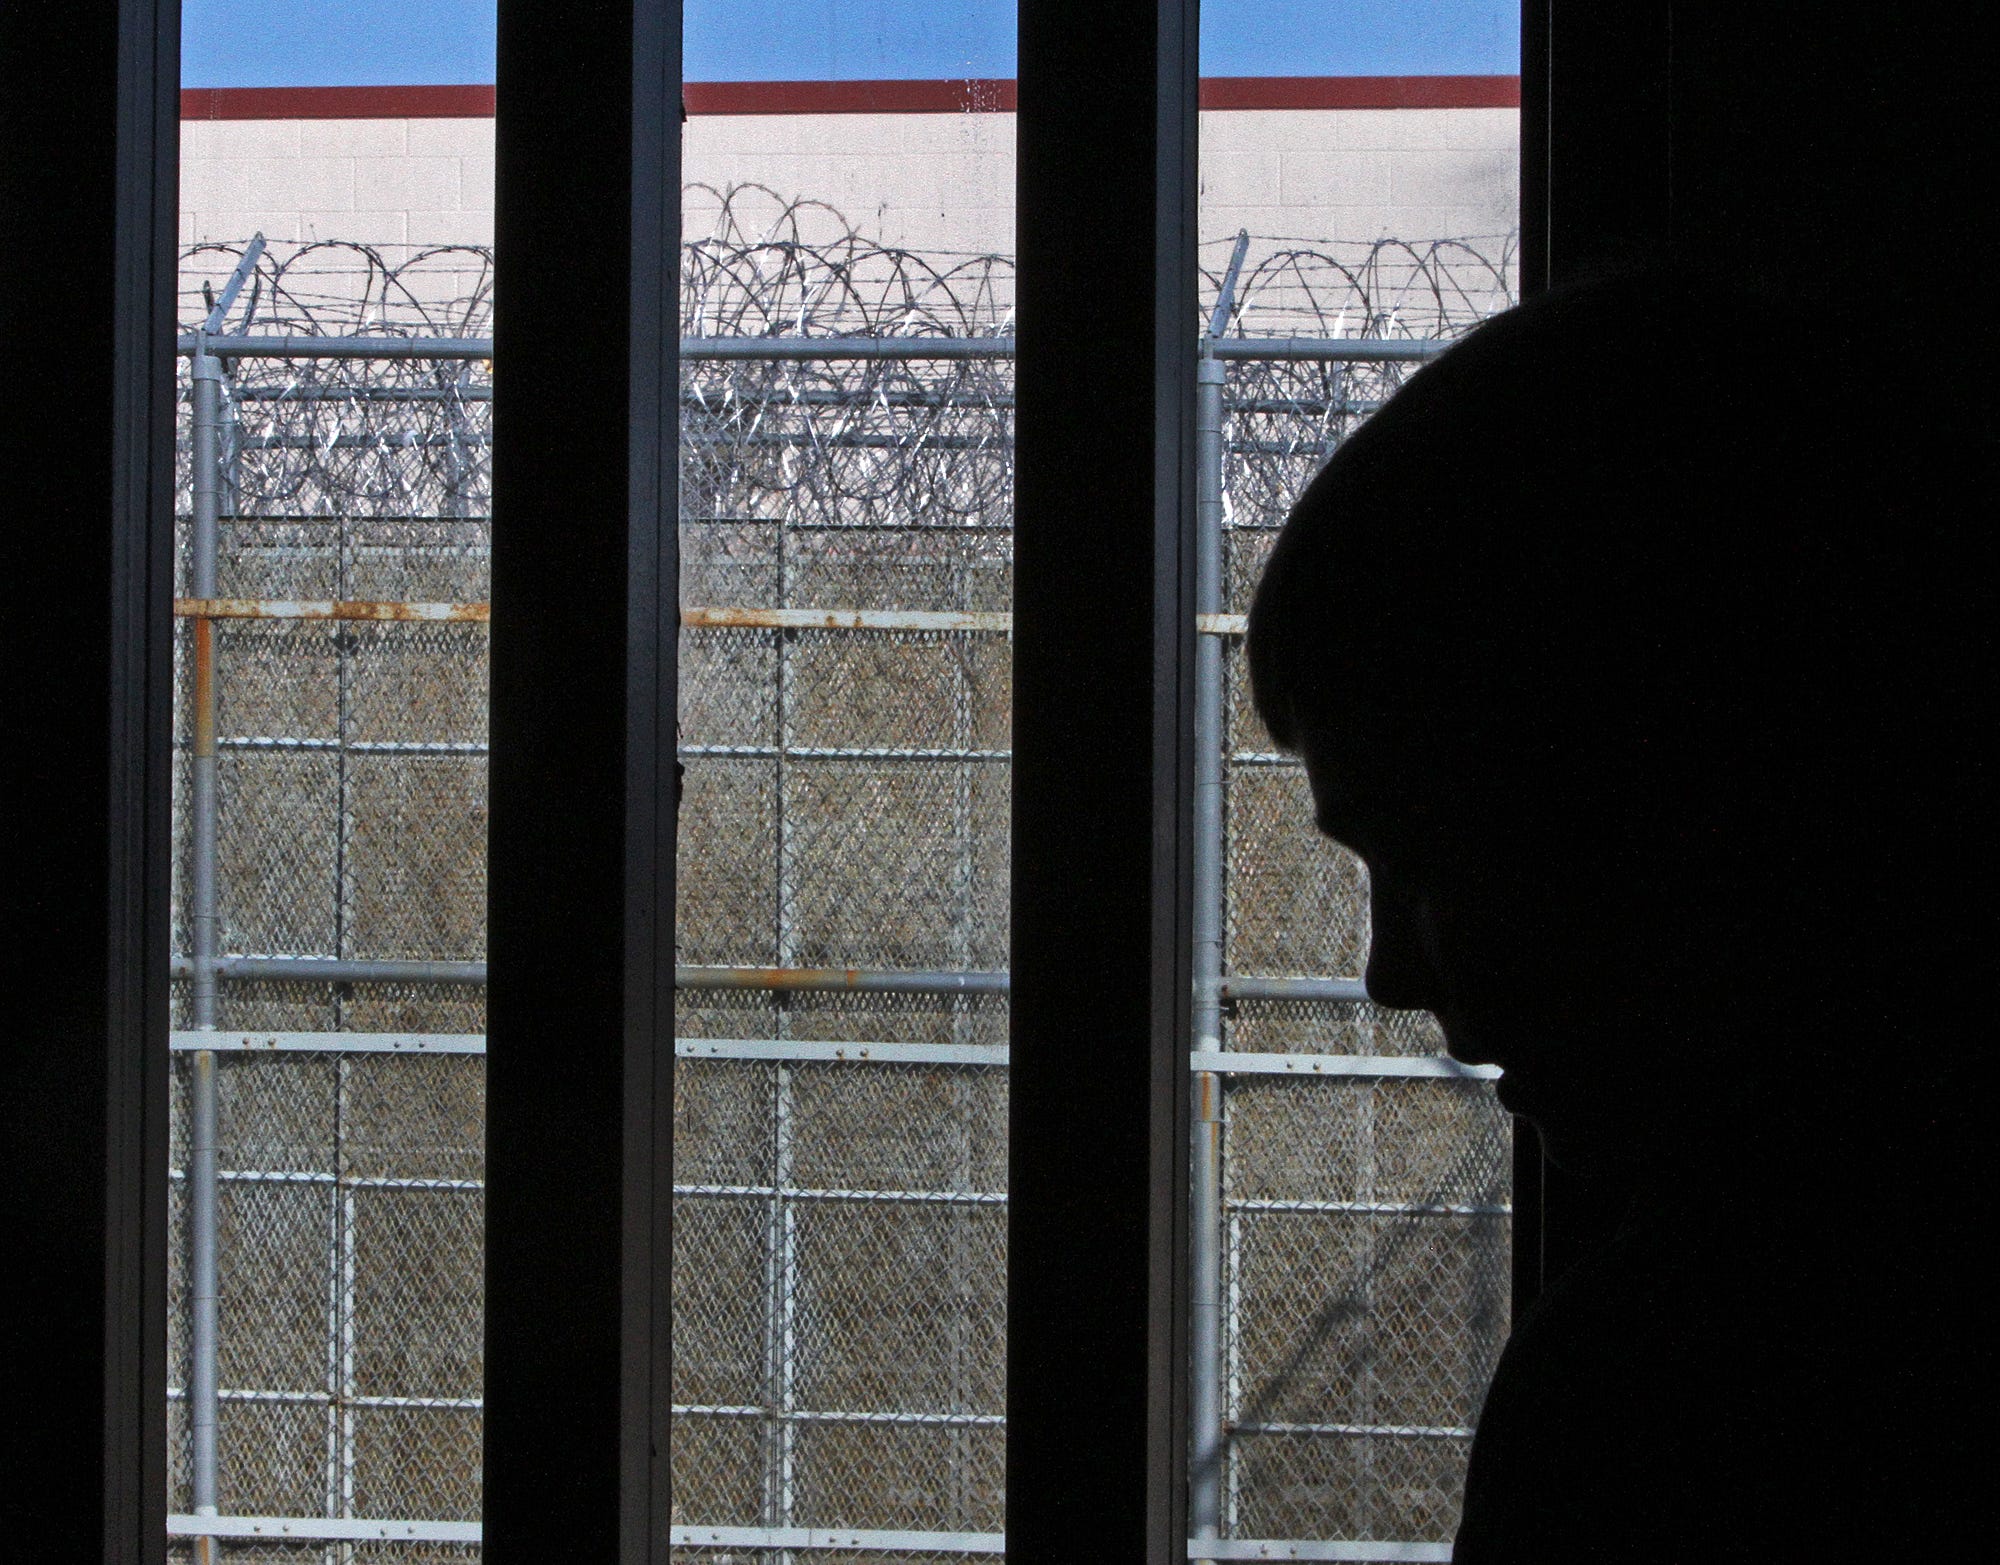 Gingerich is silhouetted in his cell, razor wire seen outside, as he spends his 14th birthday in jail on Feb. 17, 2012.